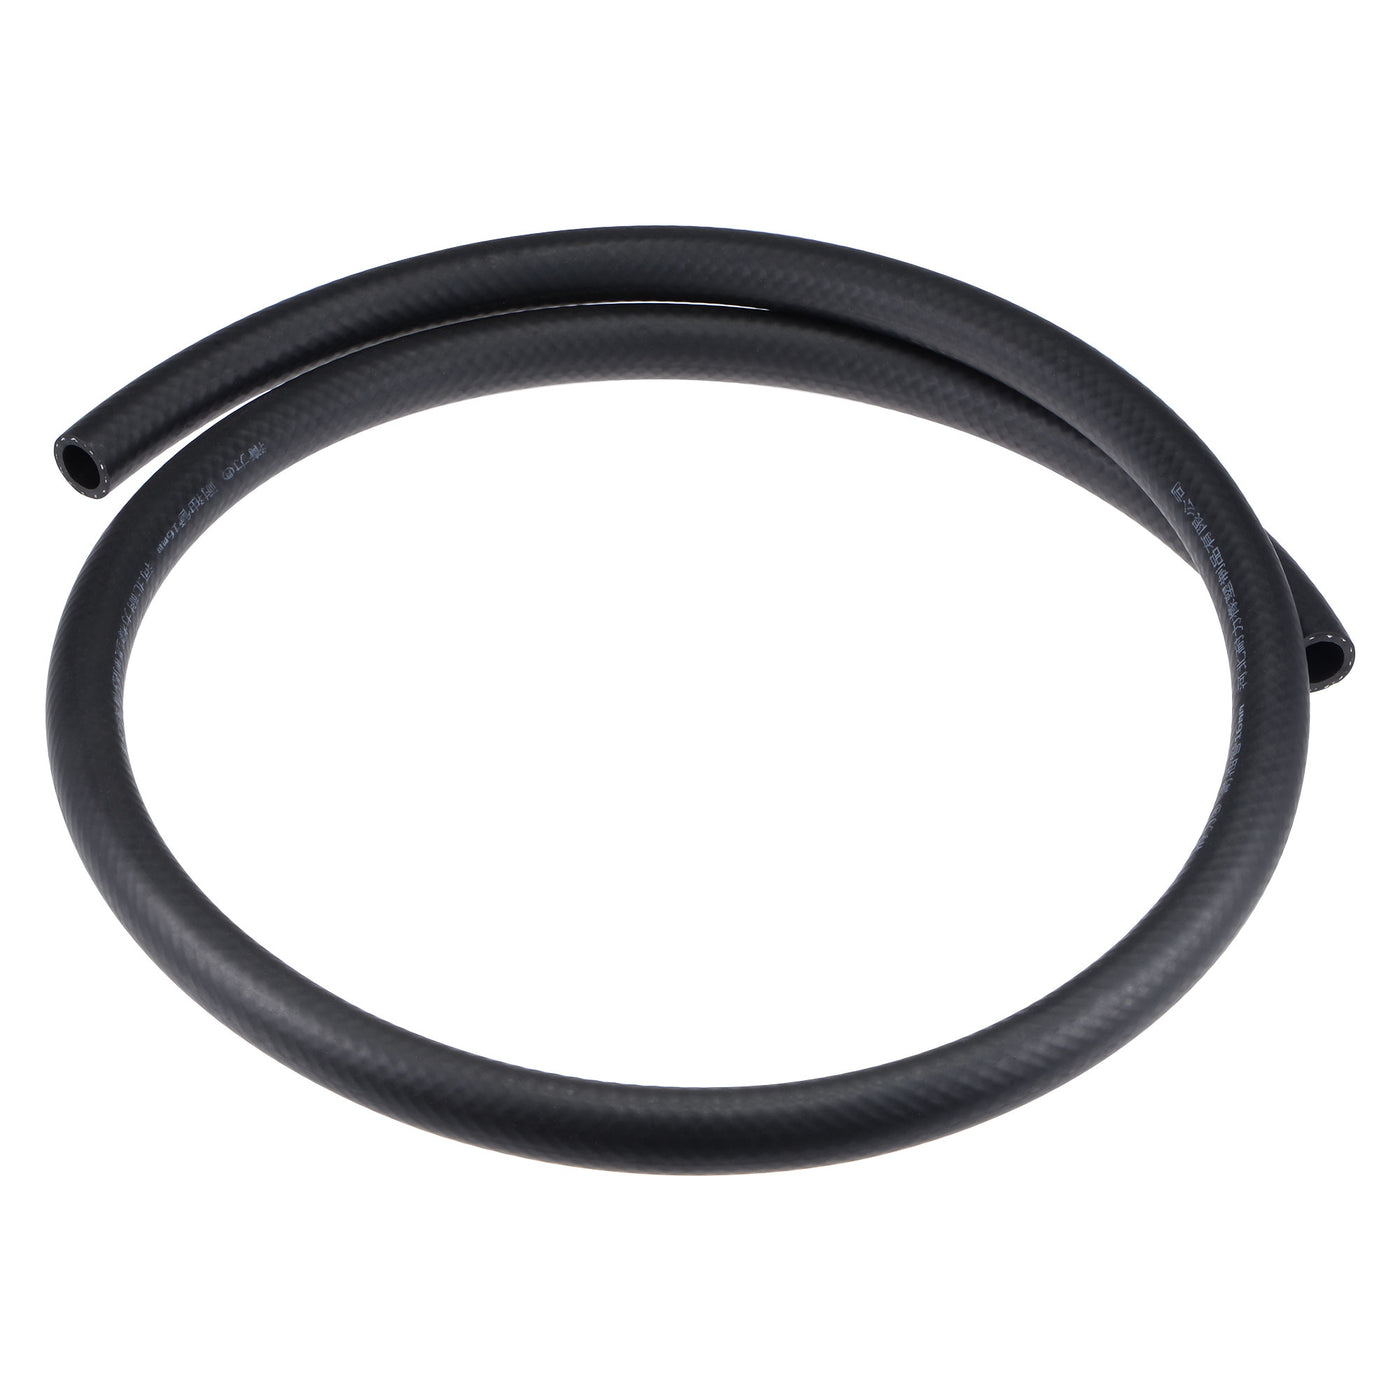 uxcell Uxcell 5/8" ID Fuel Line Hose, 29/32" OD 5ft Oil Tubing Black for Small Engines